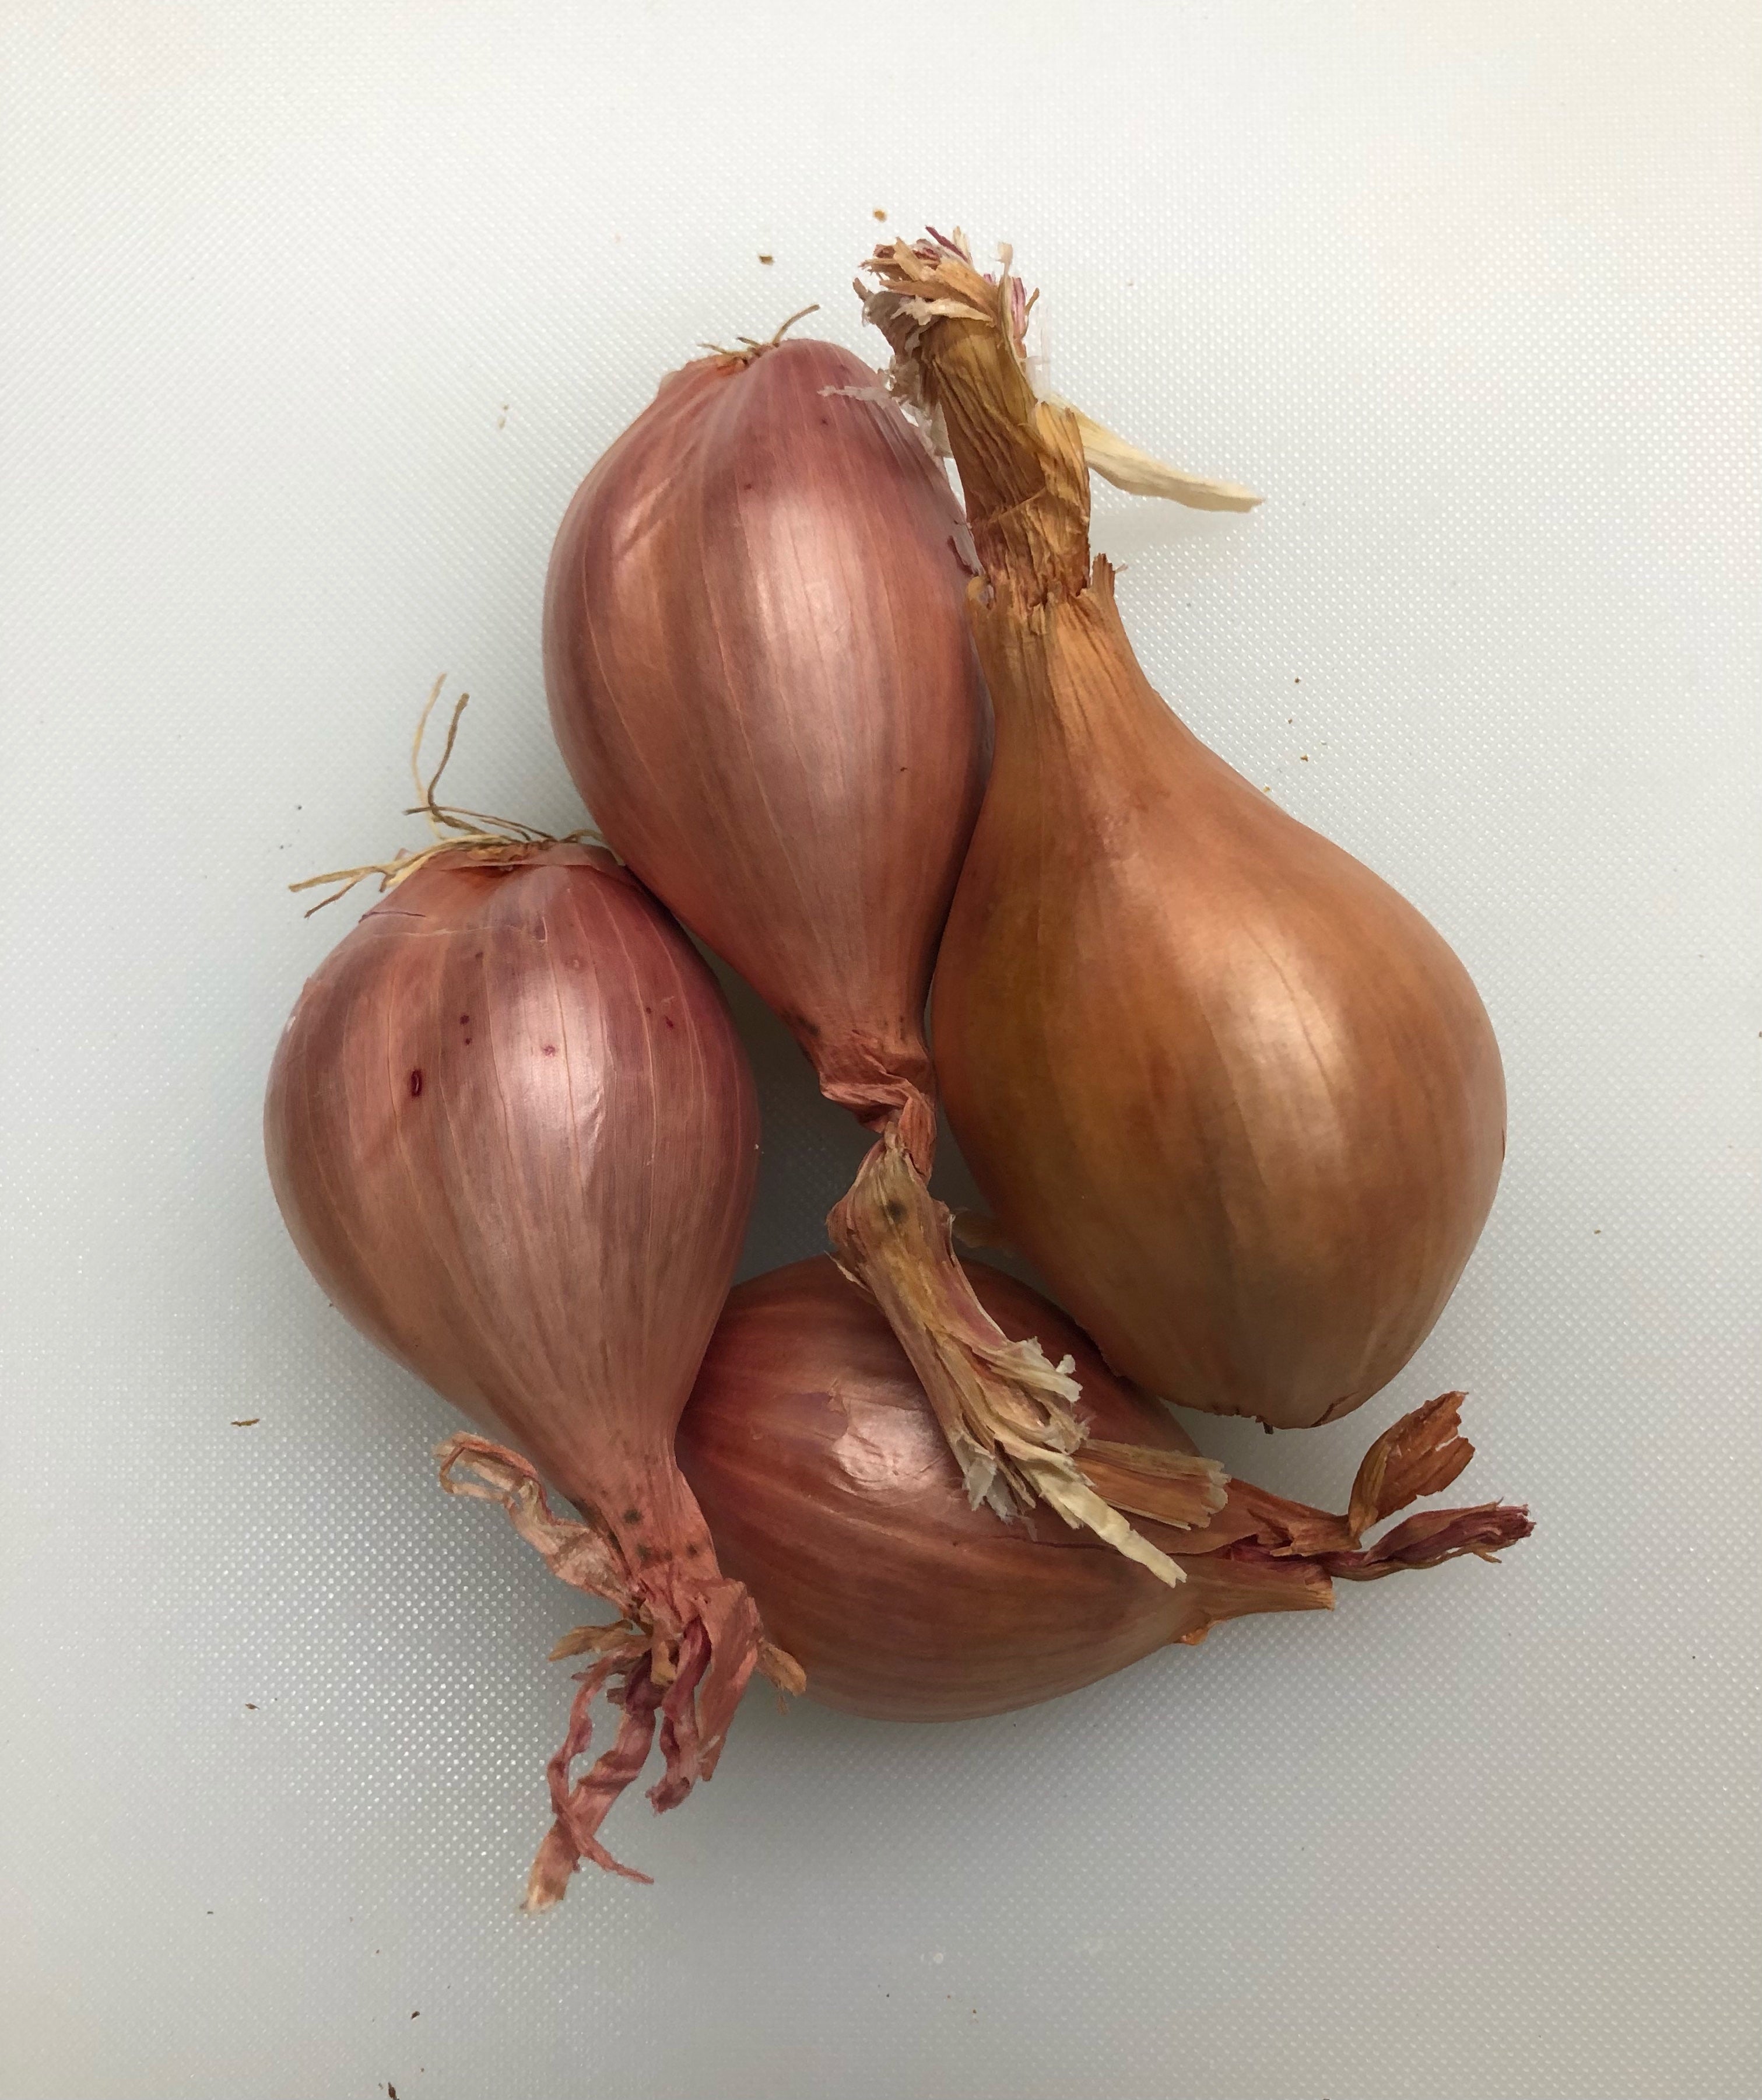  Shallots, 1 Pound, Freshly Harvested, Large to Medium Size,  Restaurant Qulaity, Great for cooking with a succulent flavor, a gourmet  delight.The amount of shallots depends on size & weight shallot. 